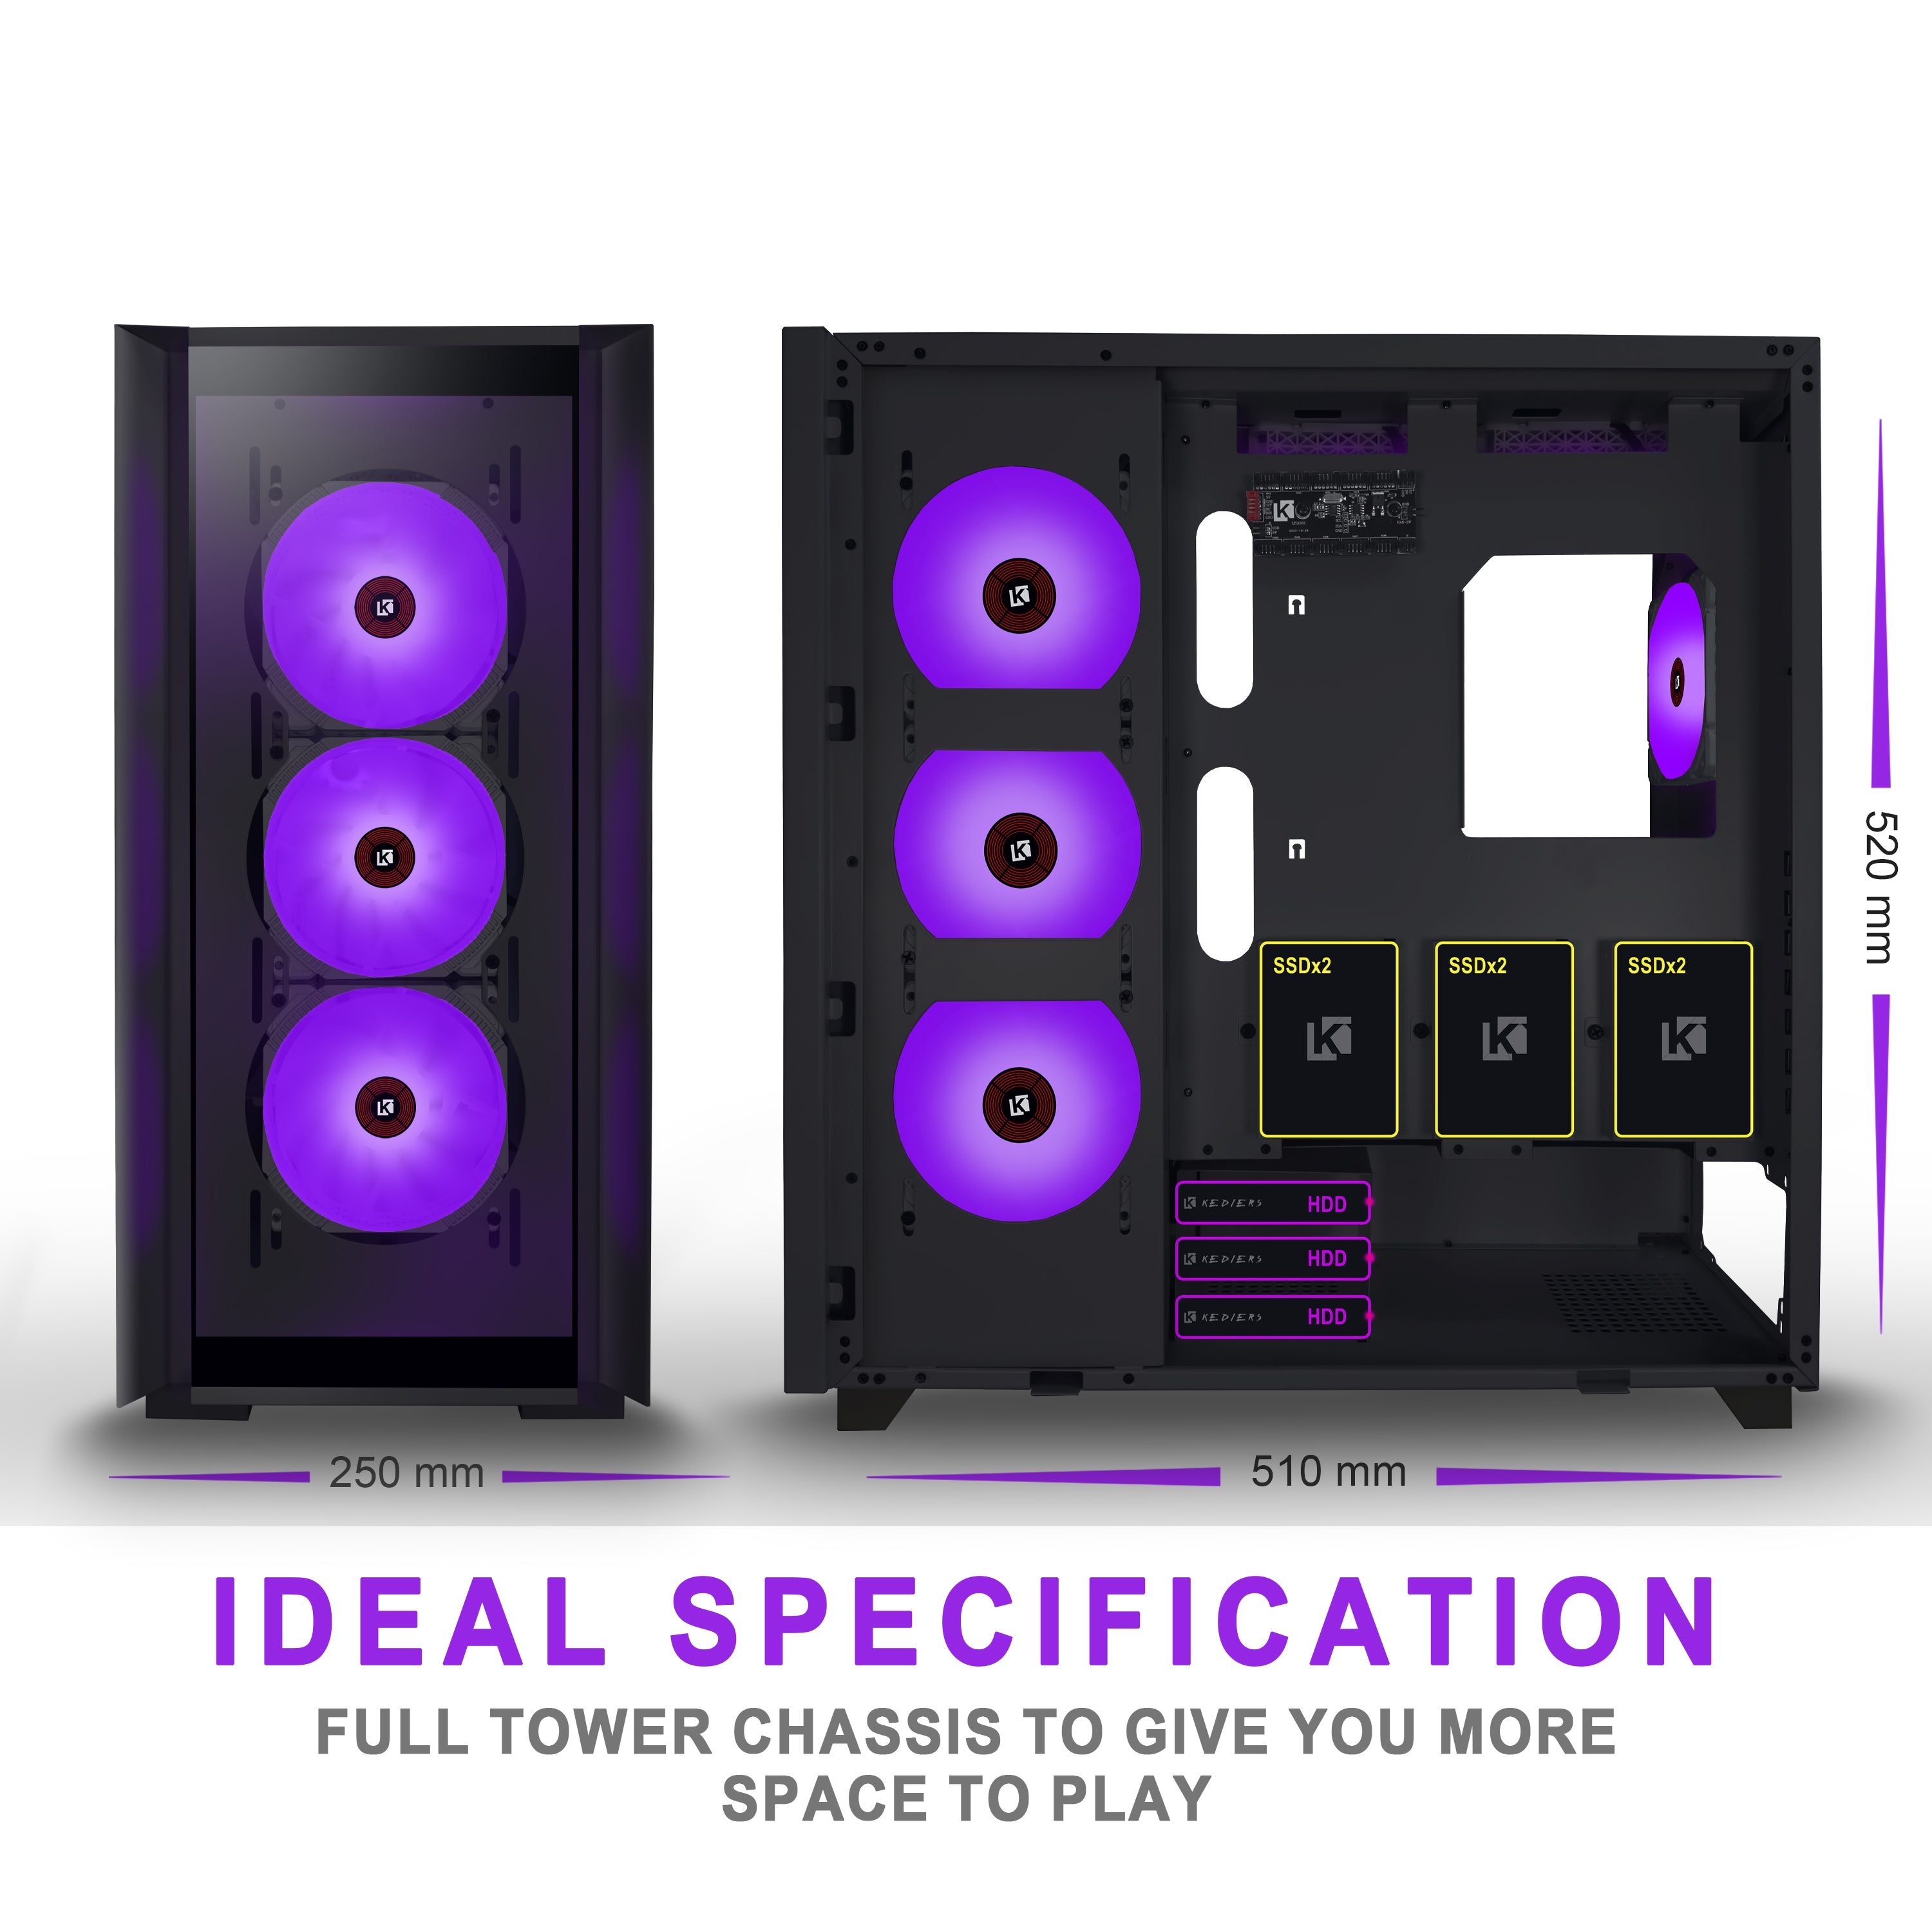  KEDIERS Micro ATX Tower PC Case 7 ARGB Fans Gaming PC